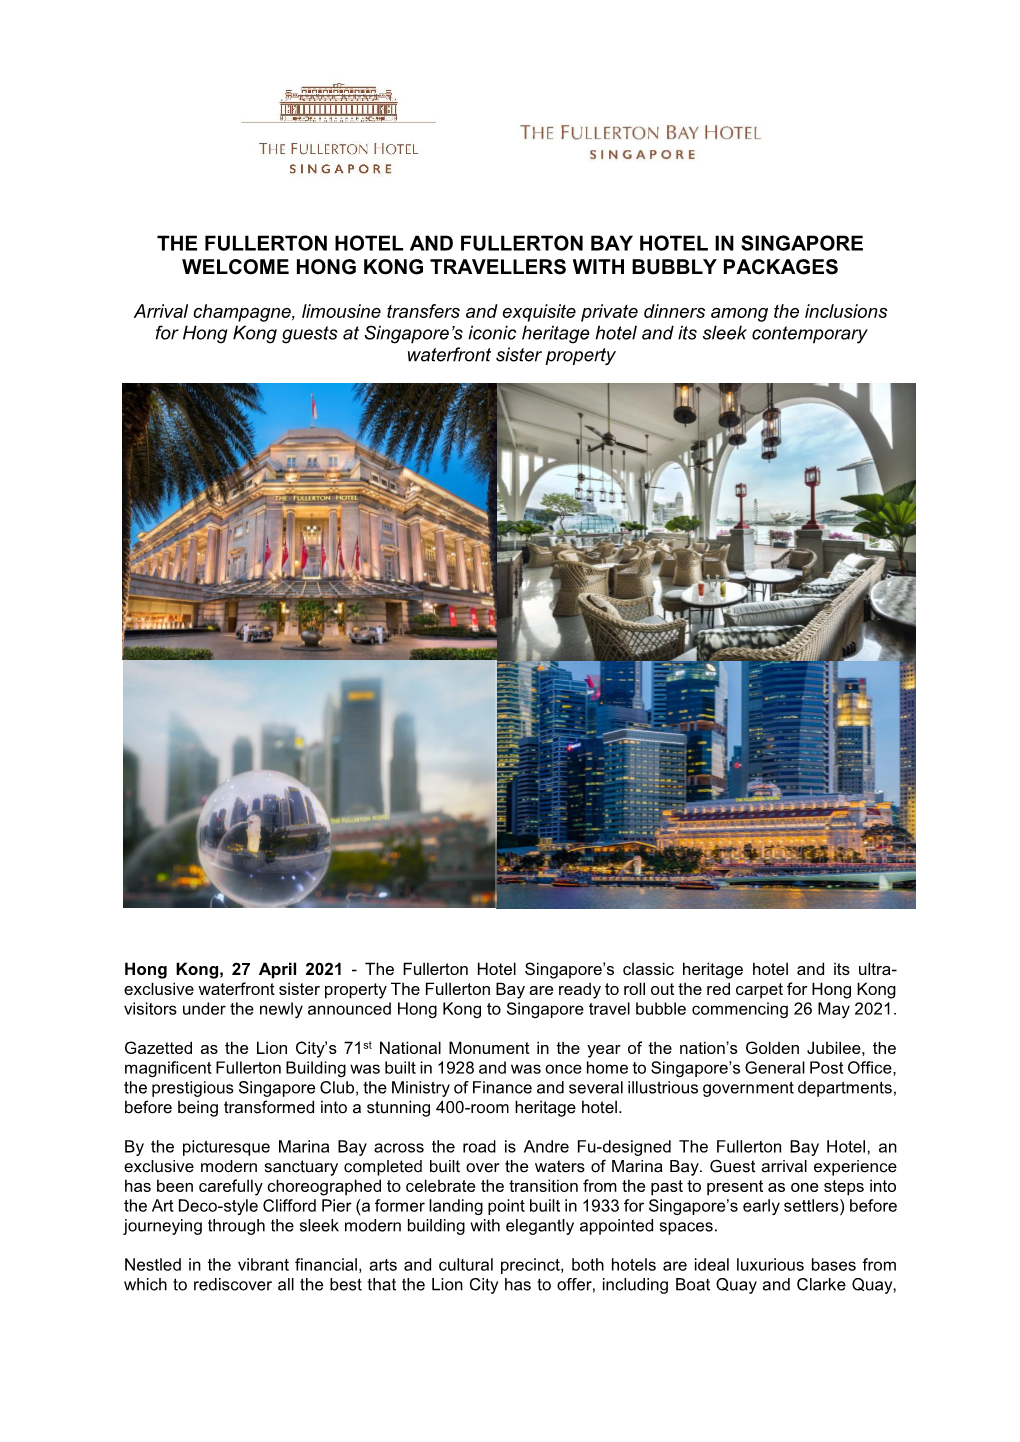 The Fullerton Hotel and Fullerton Bay Hotel in Singapore Welcome Hong Kong Travellers with Bubbly Packages